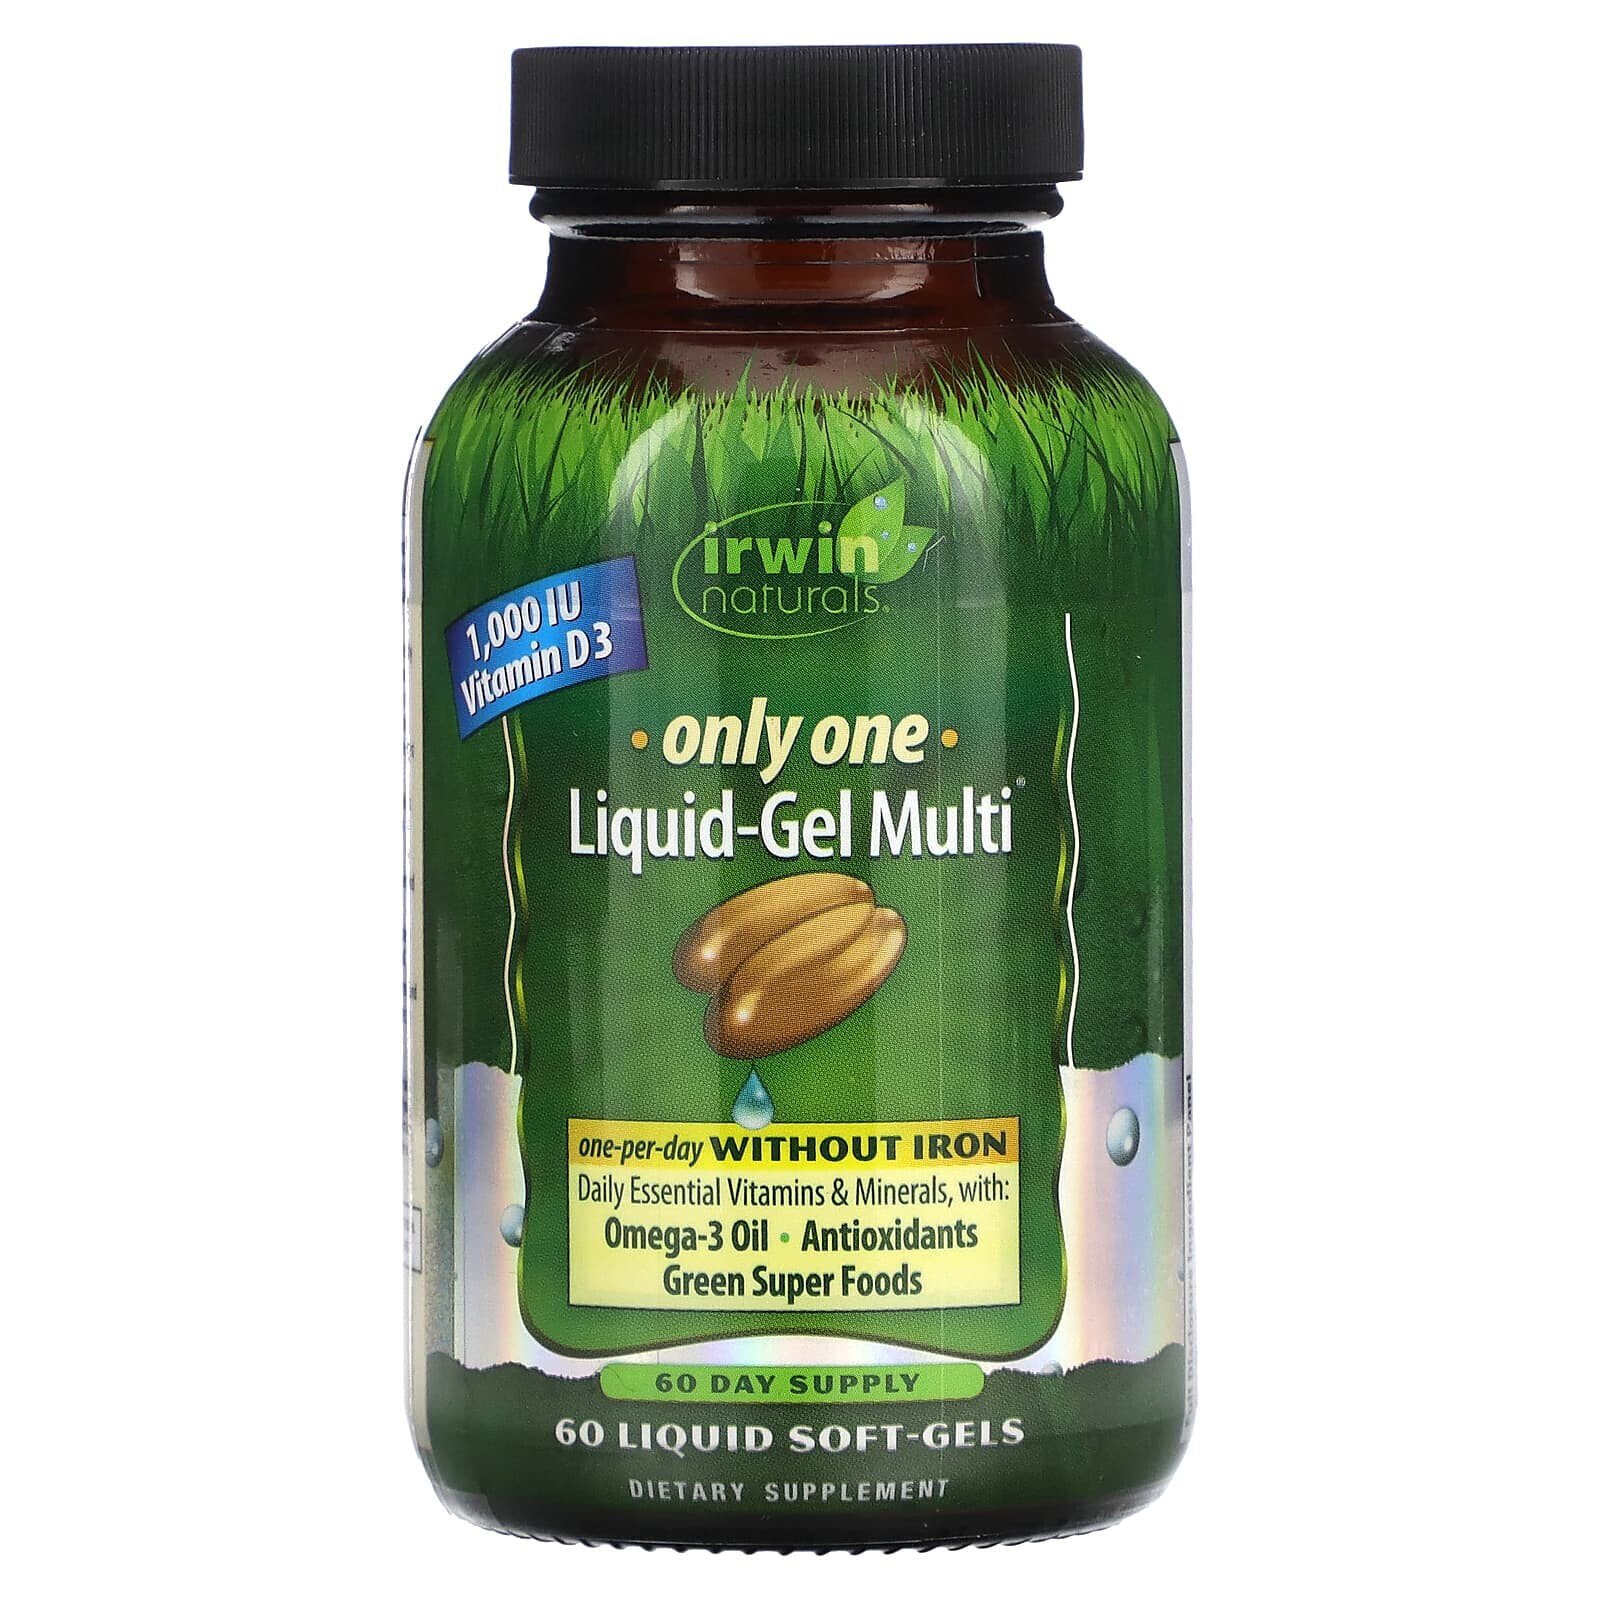 Only One, Liquid-Gel Multi, Without Iron, 60 Liquid Soft-Gels